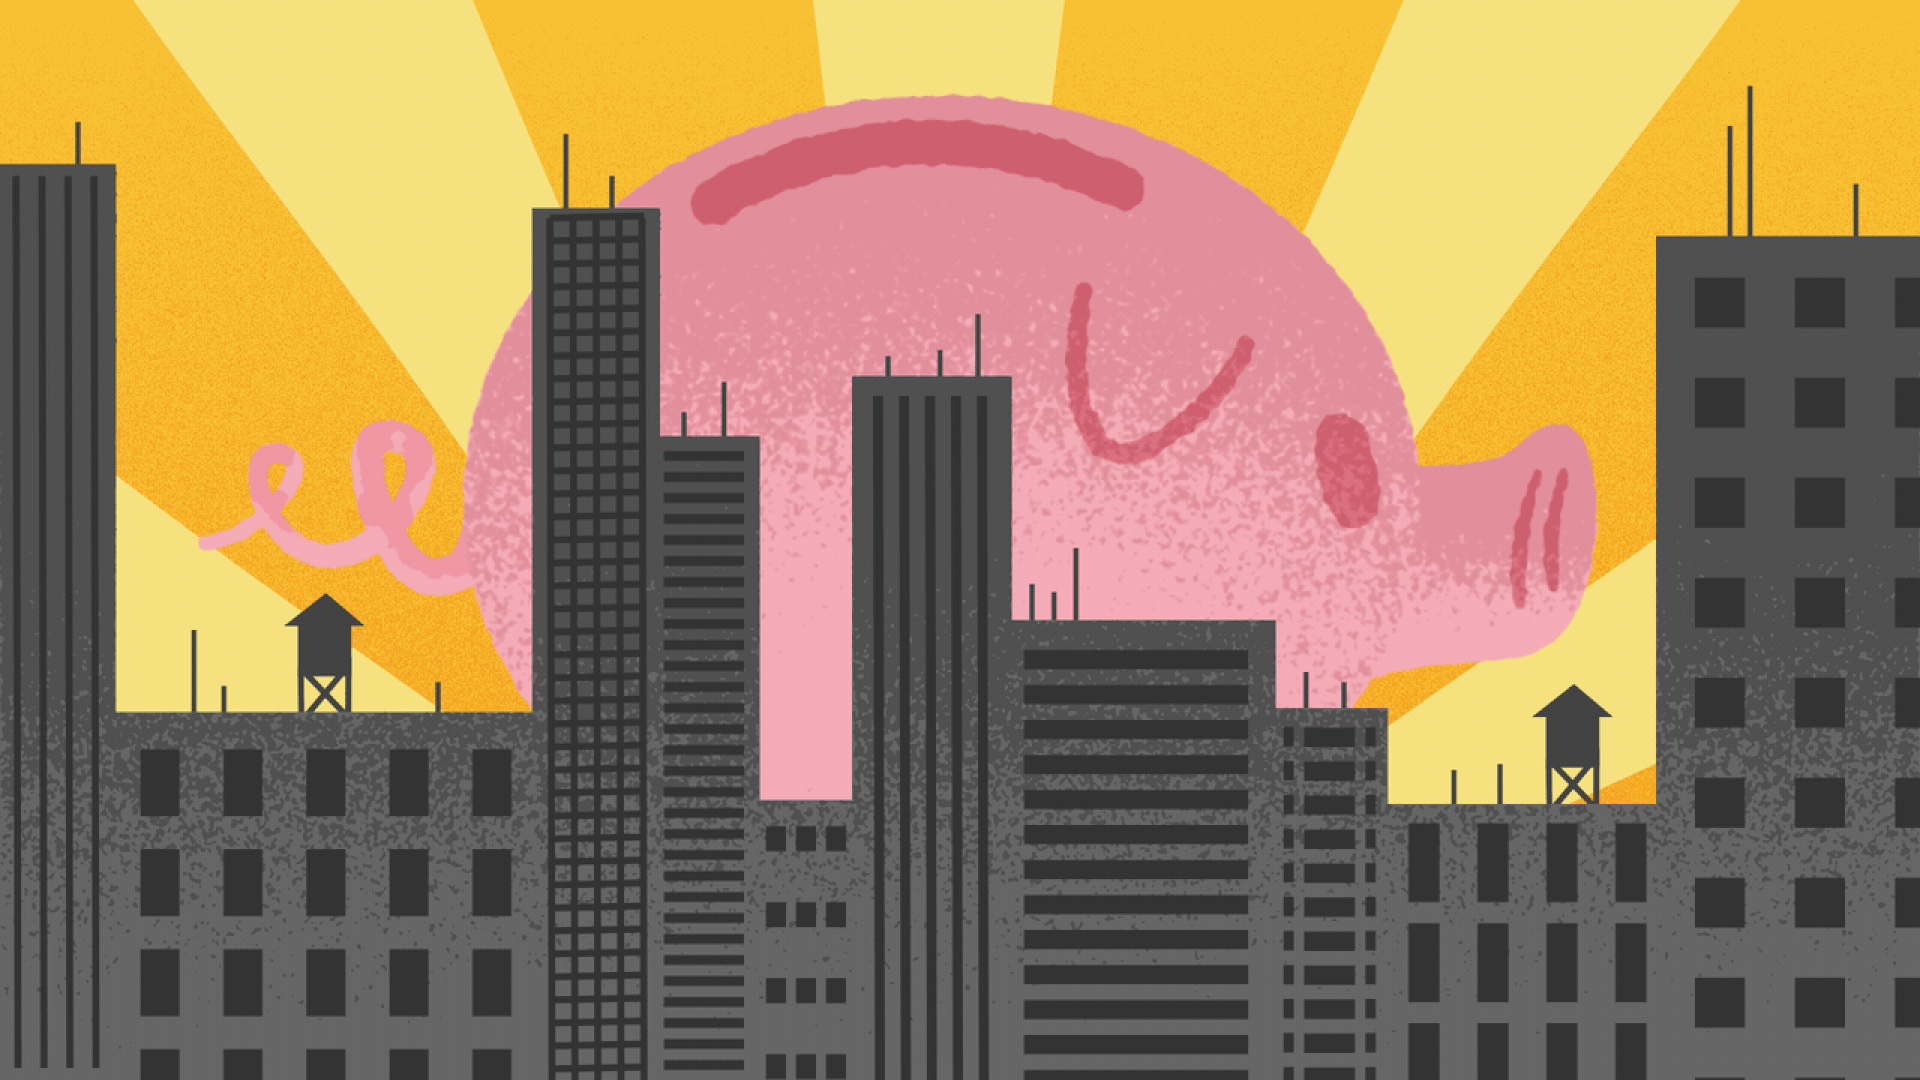 Illustration of a humongous piggy bank looming over a city skyline bathed in rays of light.